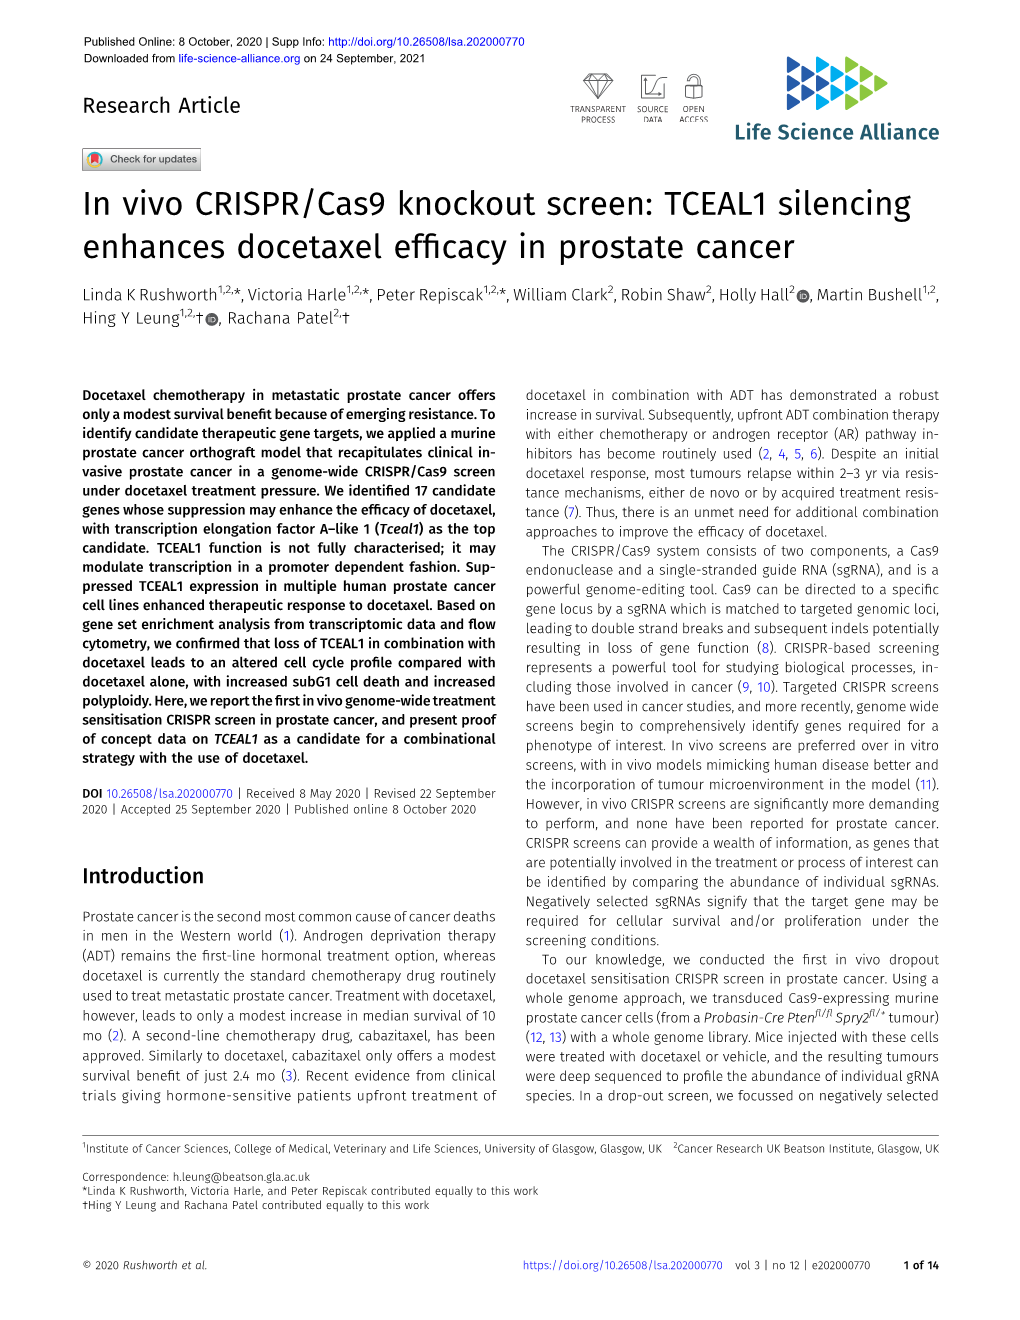 In Vivo CRISPR/Cas9 Knockout Screen: TCEAL1 Silencing Enhances Docetaxel Efﬁcacy in Prostate Cancer